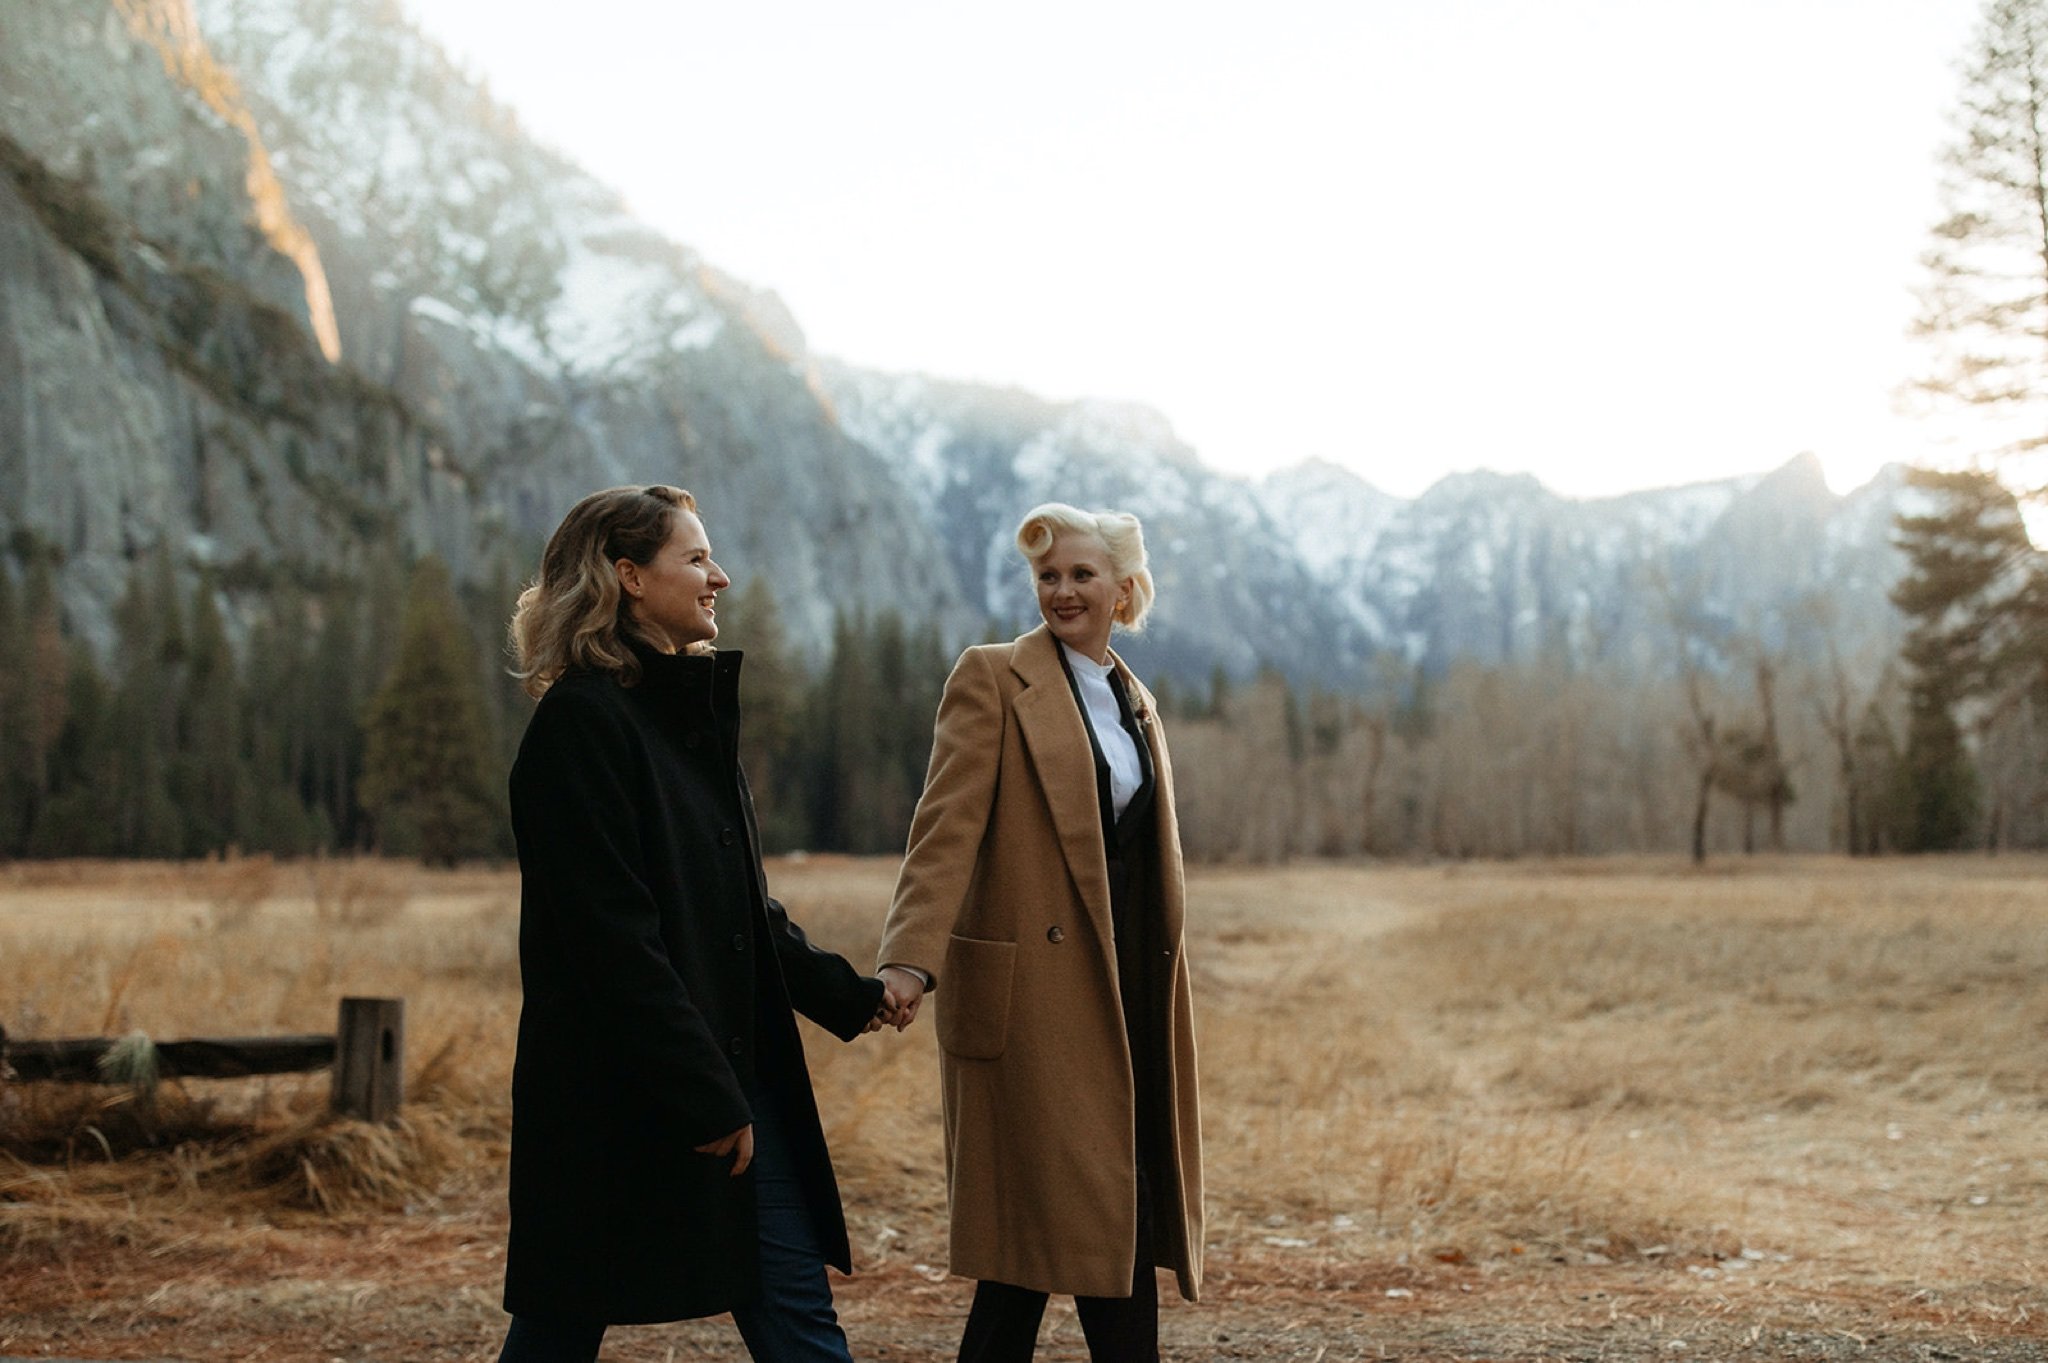 LGBT-Yosemite-National-Park-Elopement-with-Two-Brides-Will-Khoury-Elopement-Photographer_61.jpg